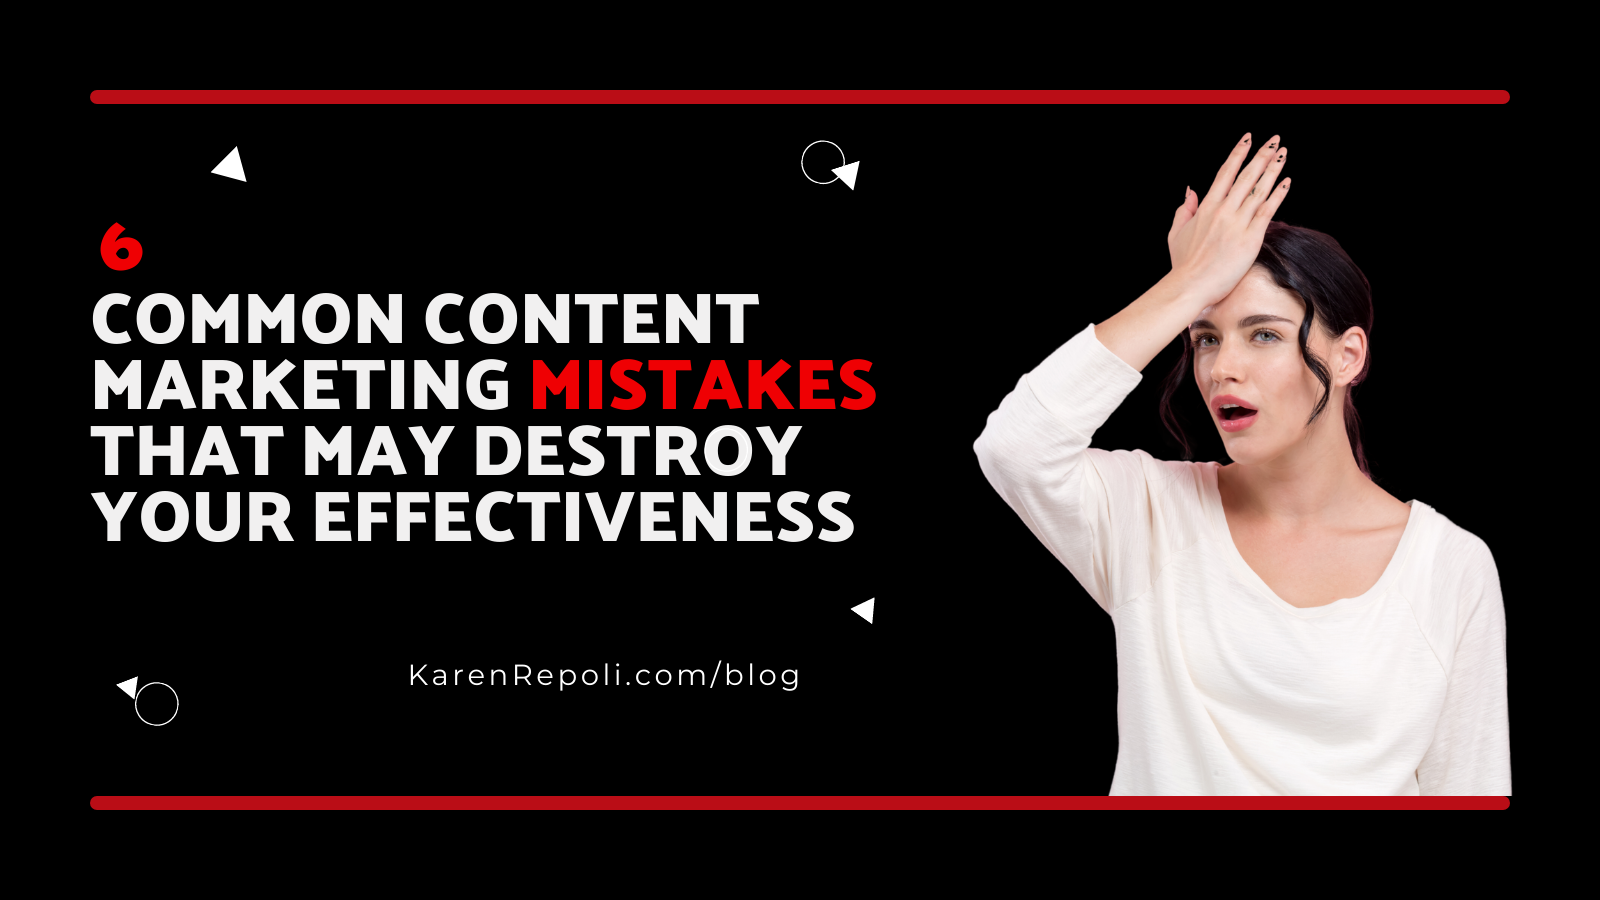 6 Common Content Marketing Mistakes That May Destroy Your Effectiveness